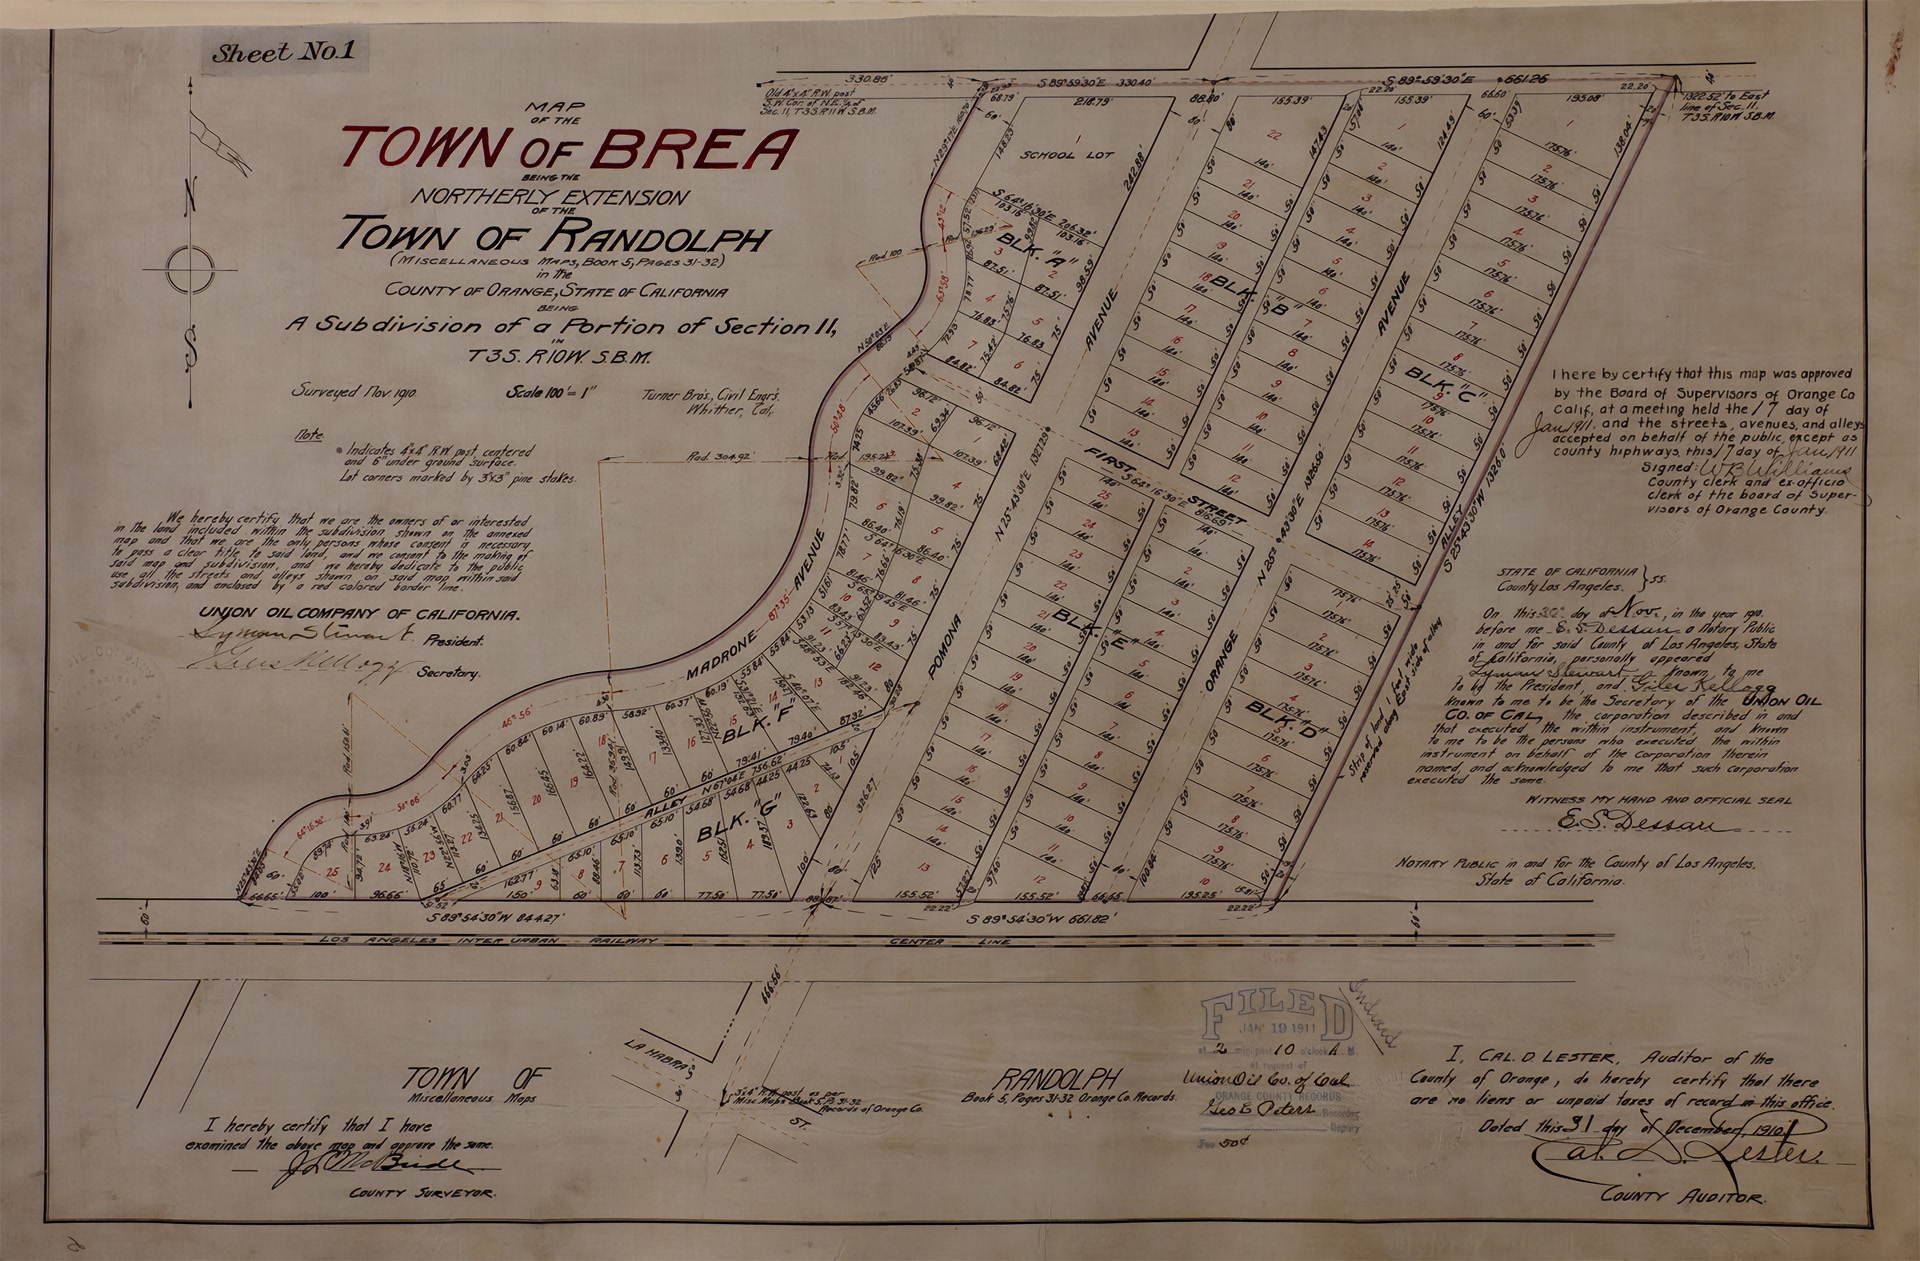 On January 19, 1911, WJ Hole filed a new map with the County Recorder, changing the name to Brea and expanding the town by several blocks. In 1917, Brea was incorporated into Orange County.